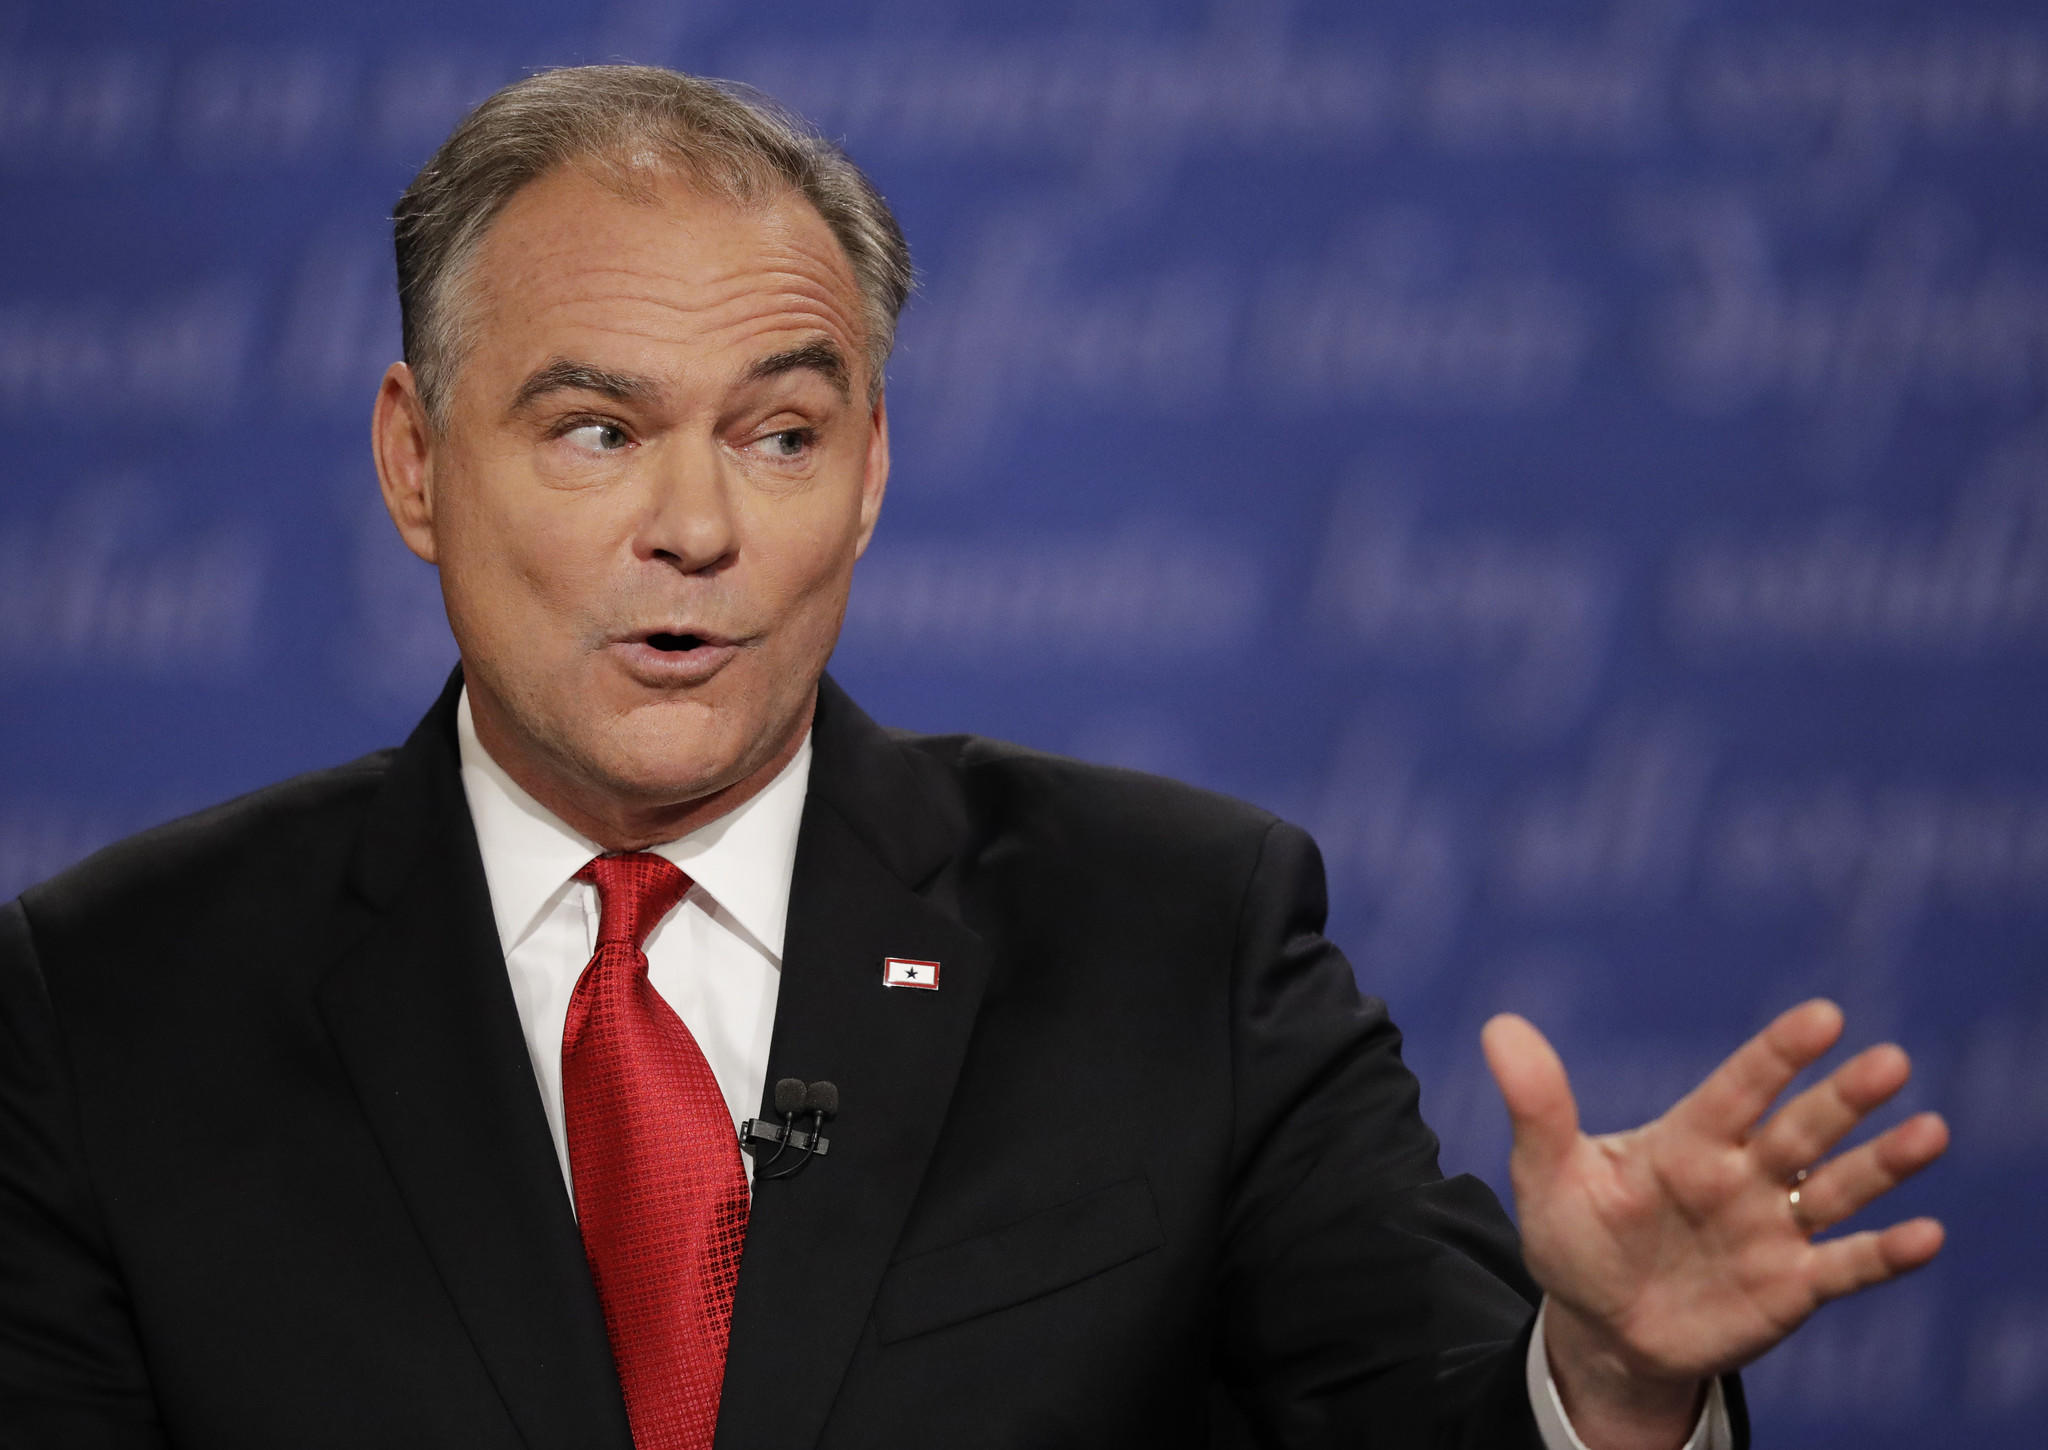 Democratic vice presidential nominee Tim Kaine defended running mate Hillary Clinton during the debate at Longwood University in Farmville, Va.